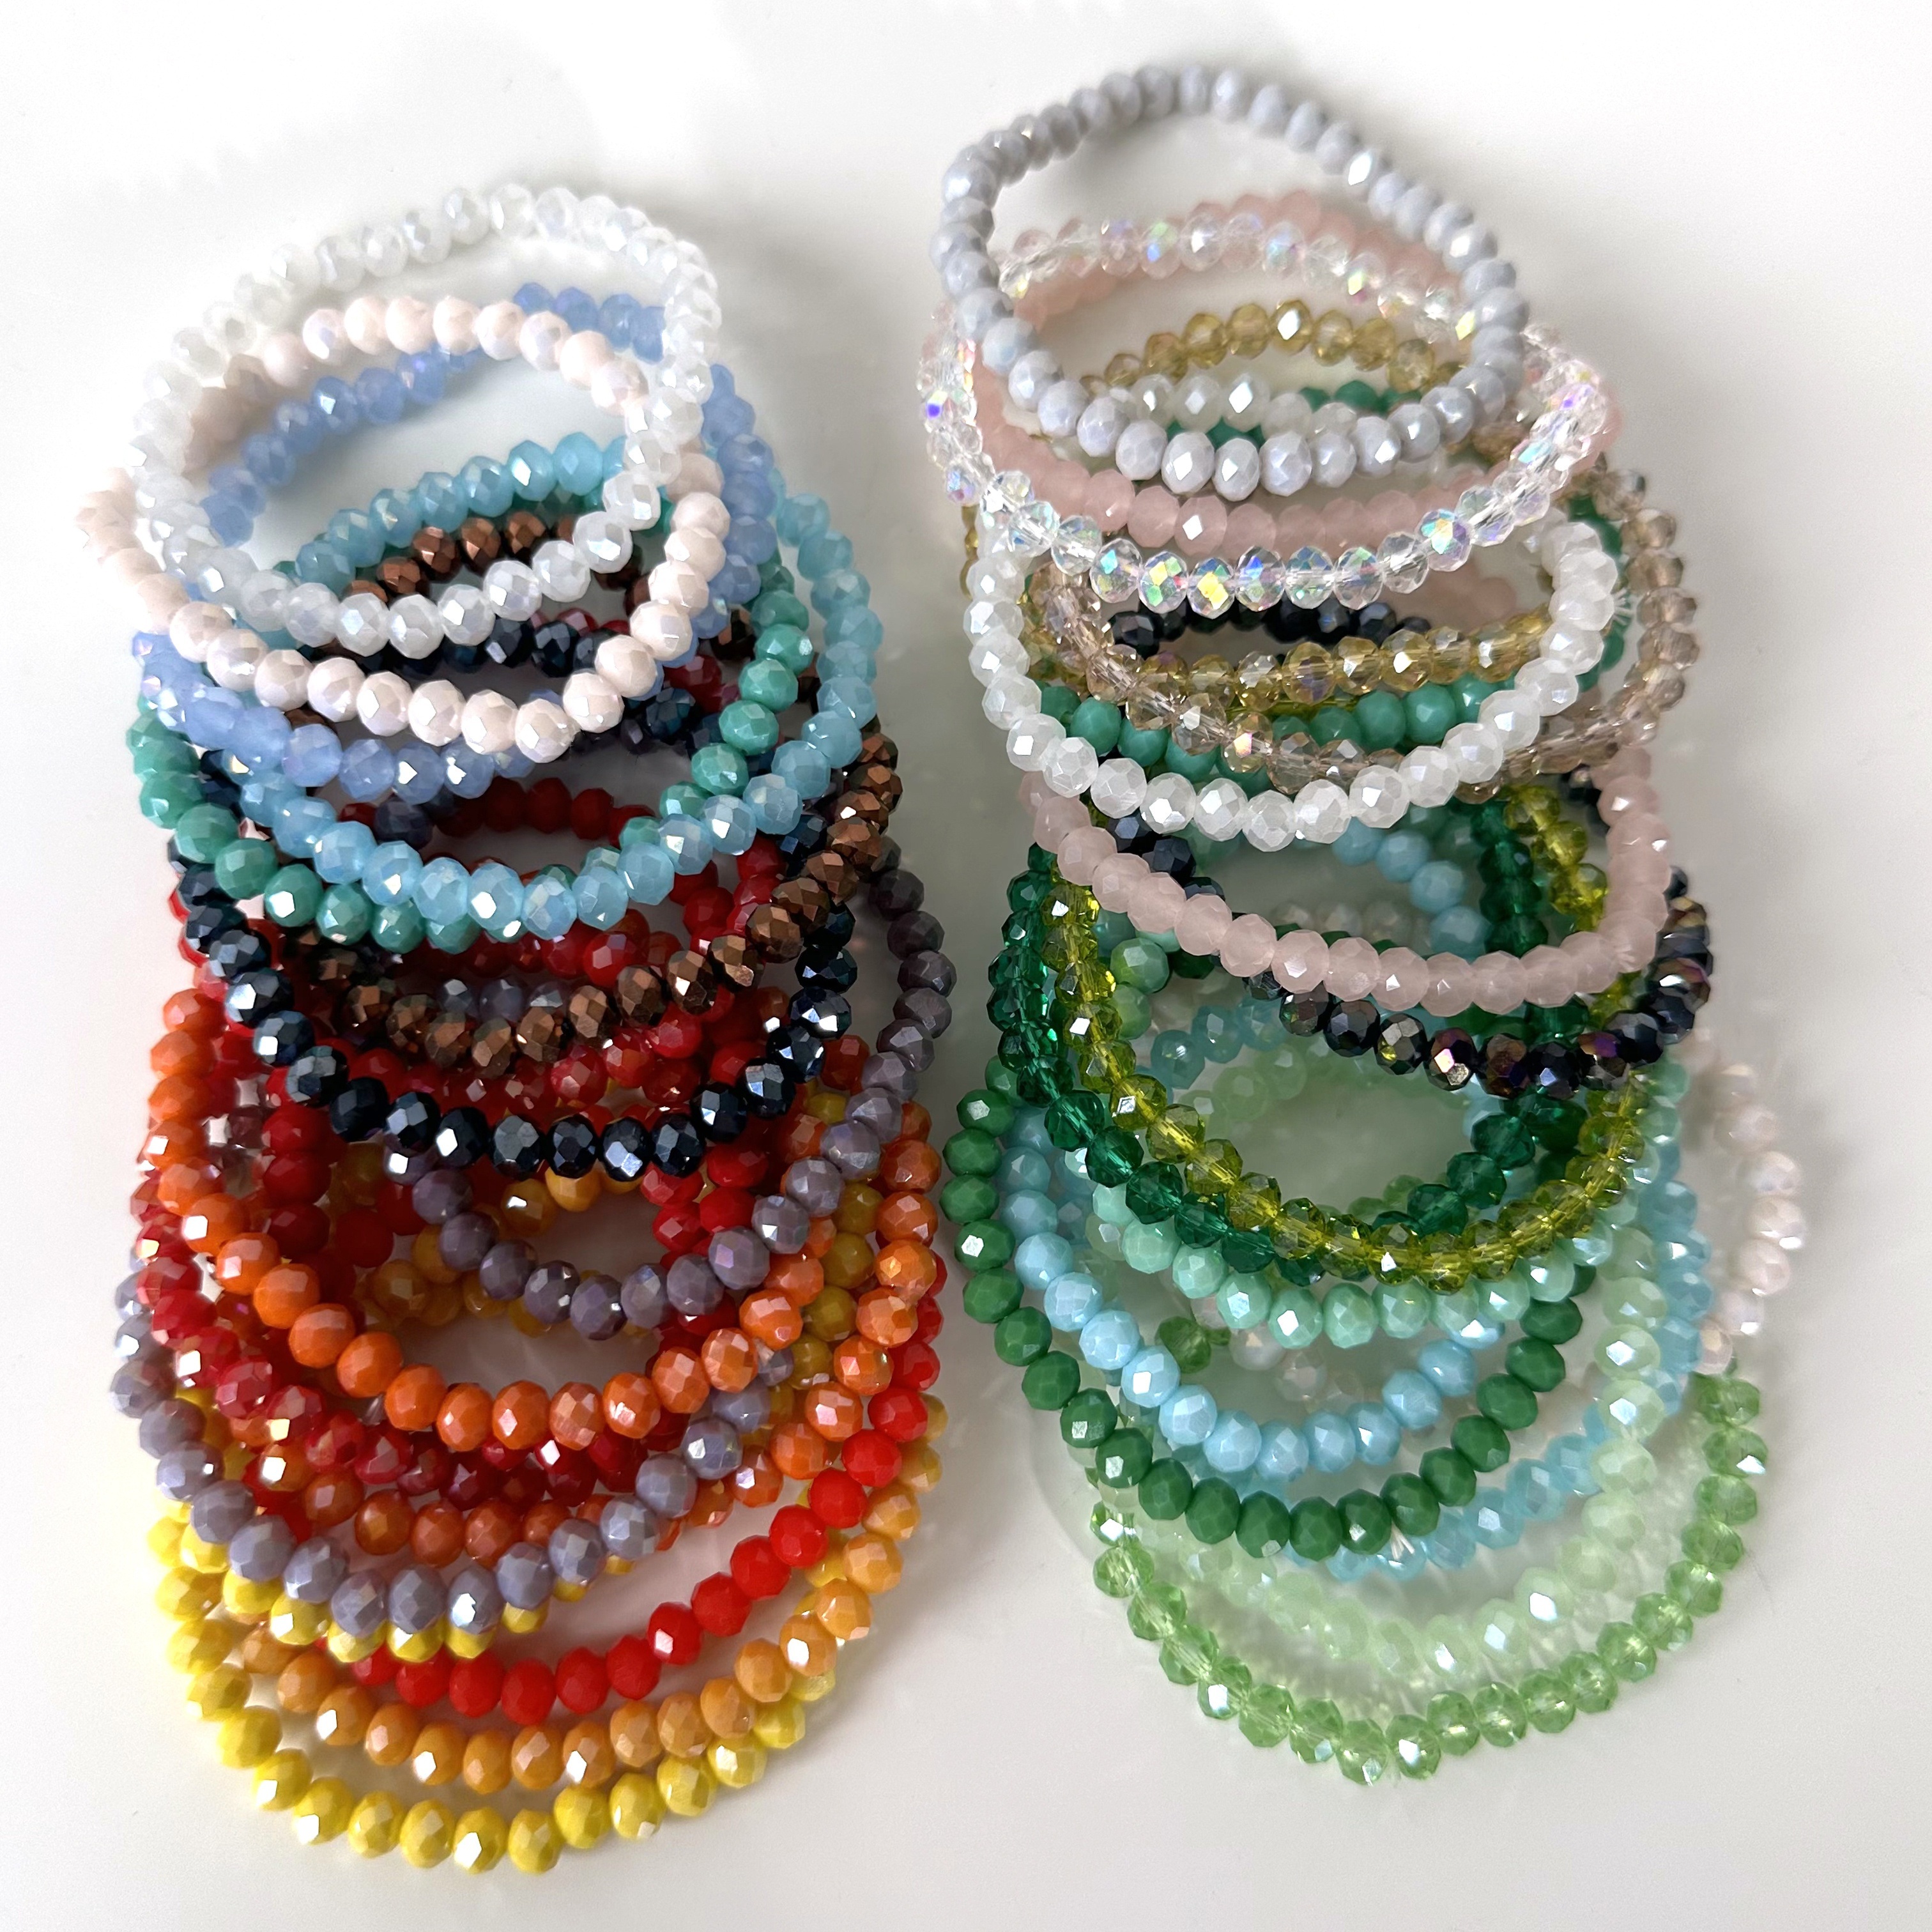 

Boho-chic 36-piece Multicolor Faux Crystal Bead Bracelet Set - Stretchy, Stackable & Perfect For Everyday Wear